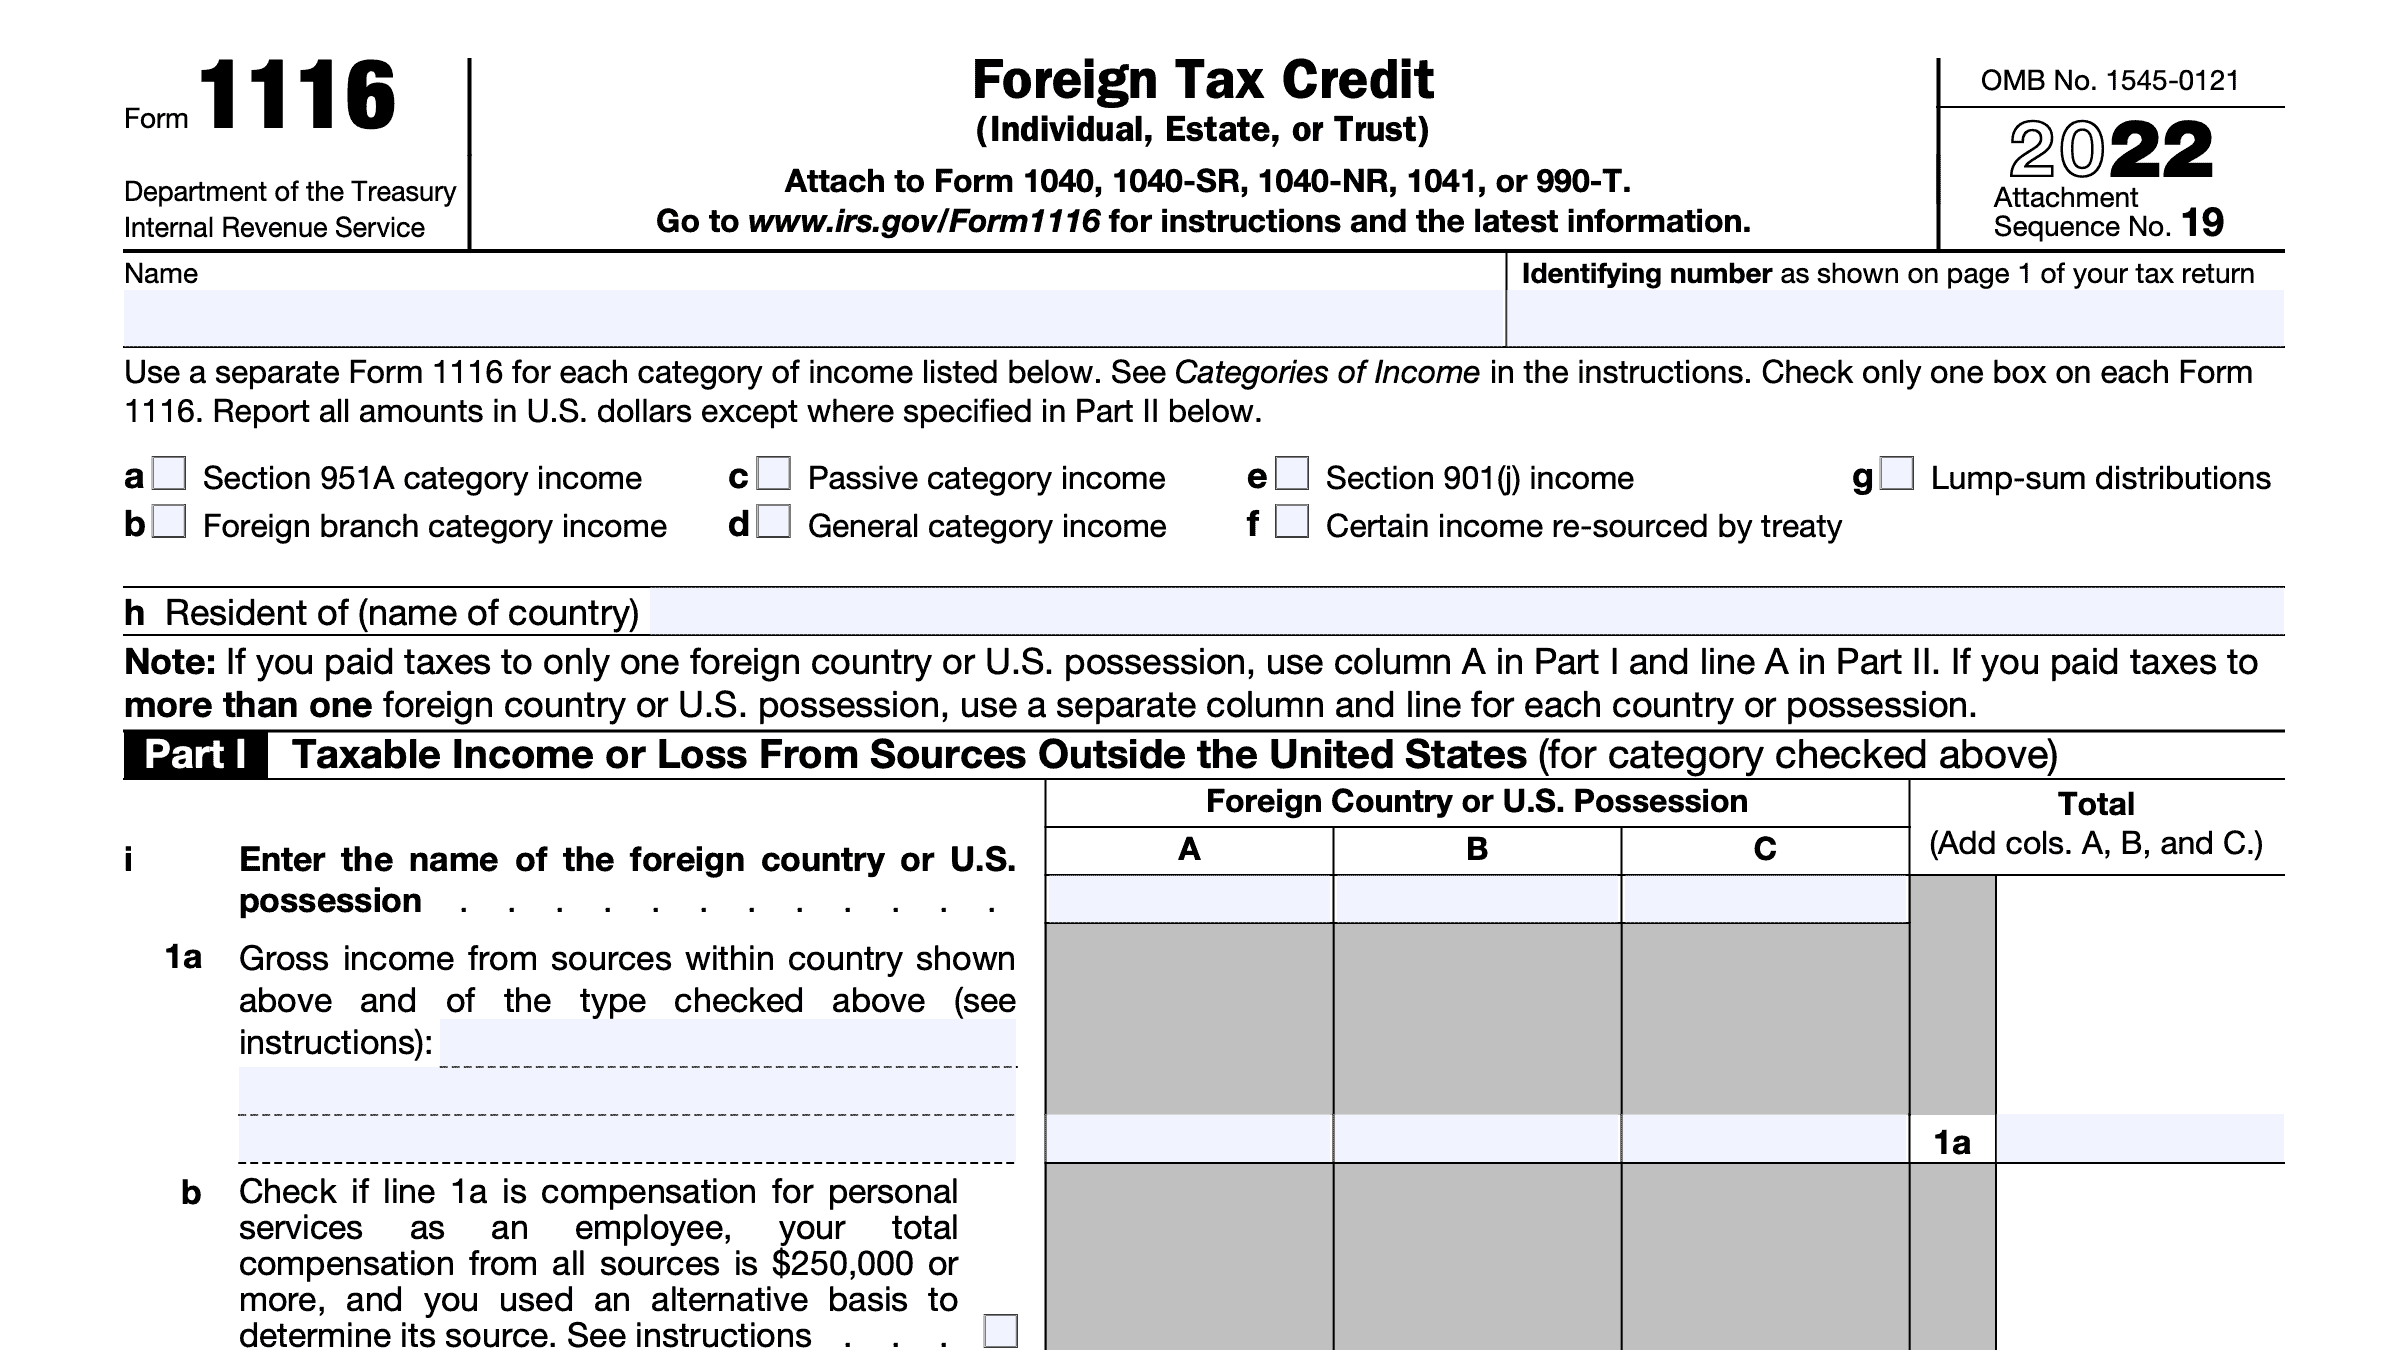 IRS Form 1116 Instructions Claiming the Foreign Tax Credit